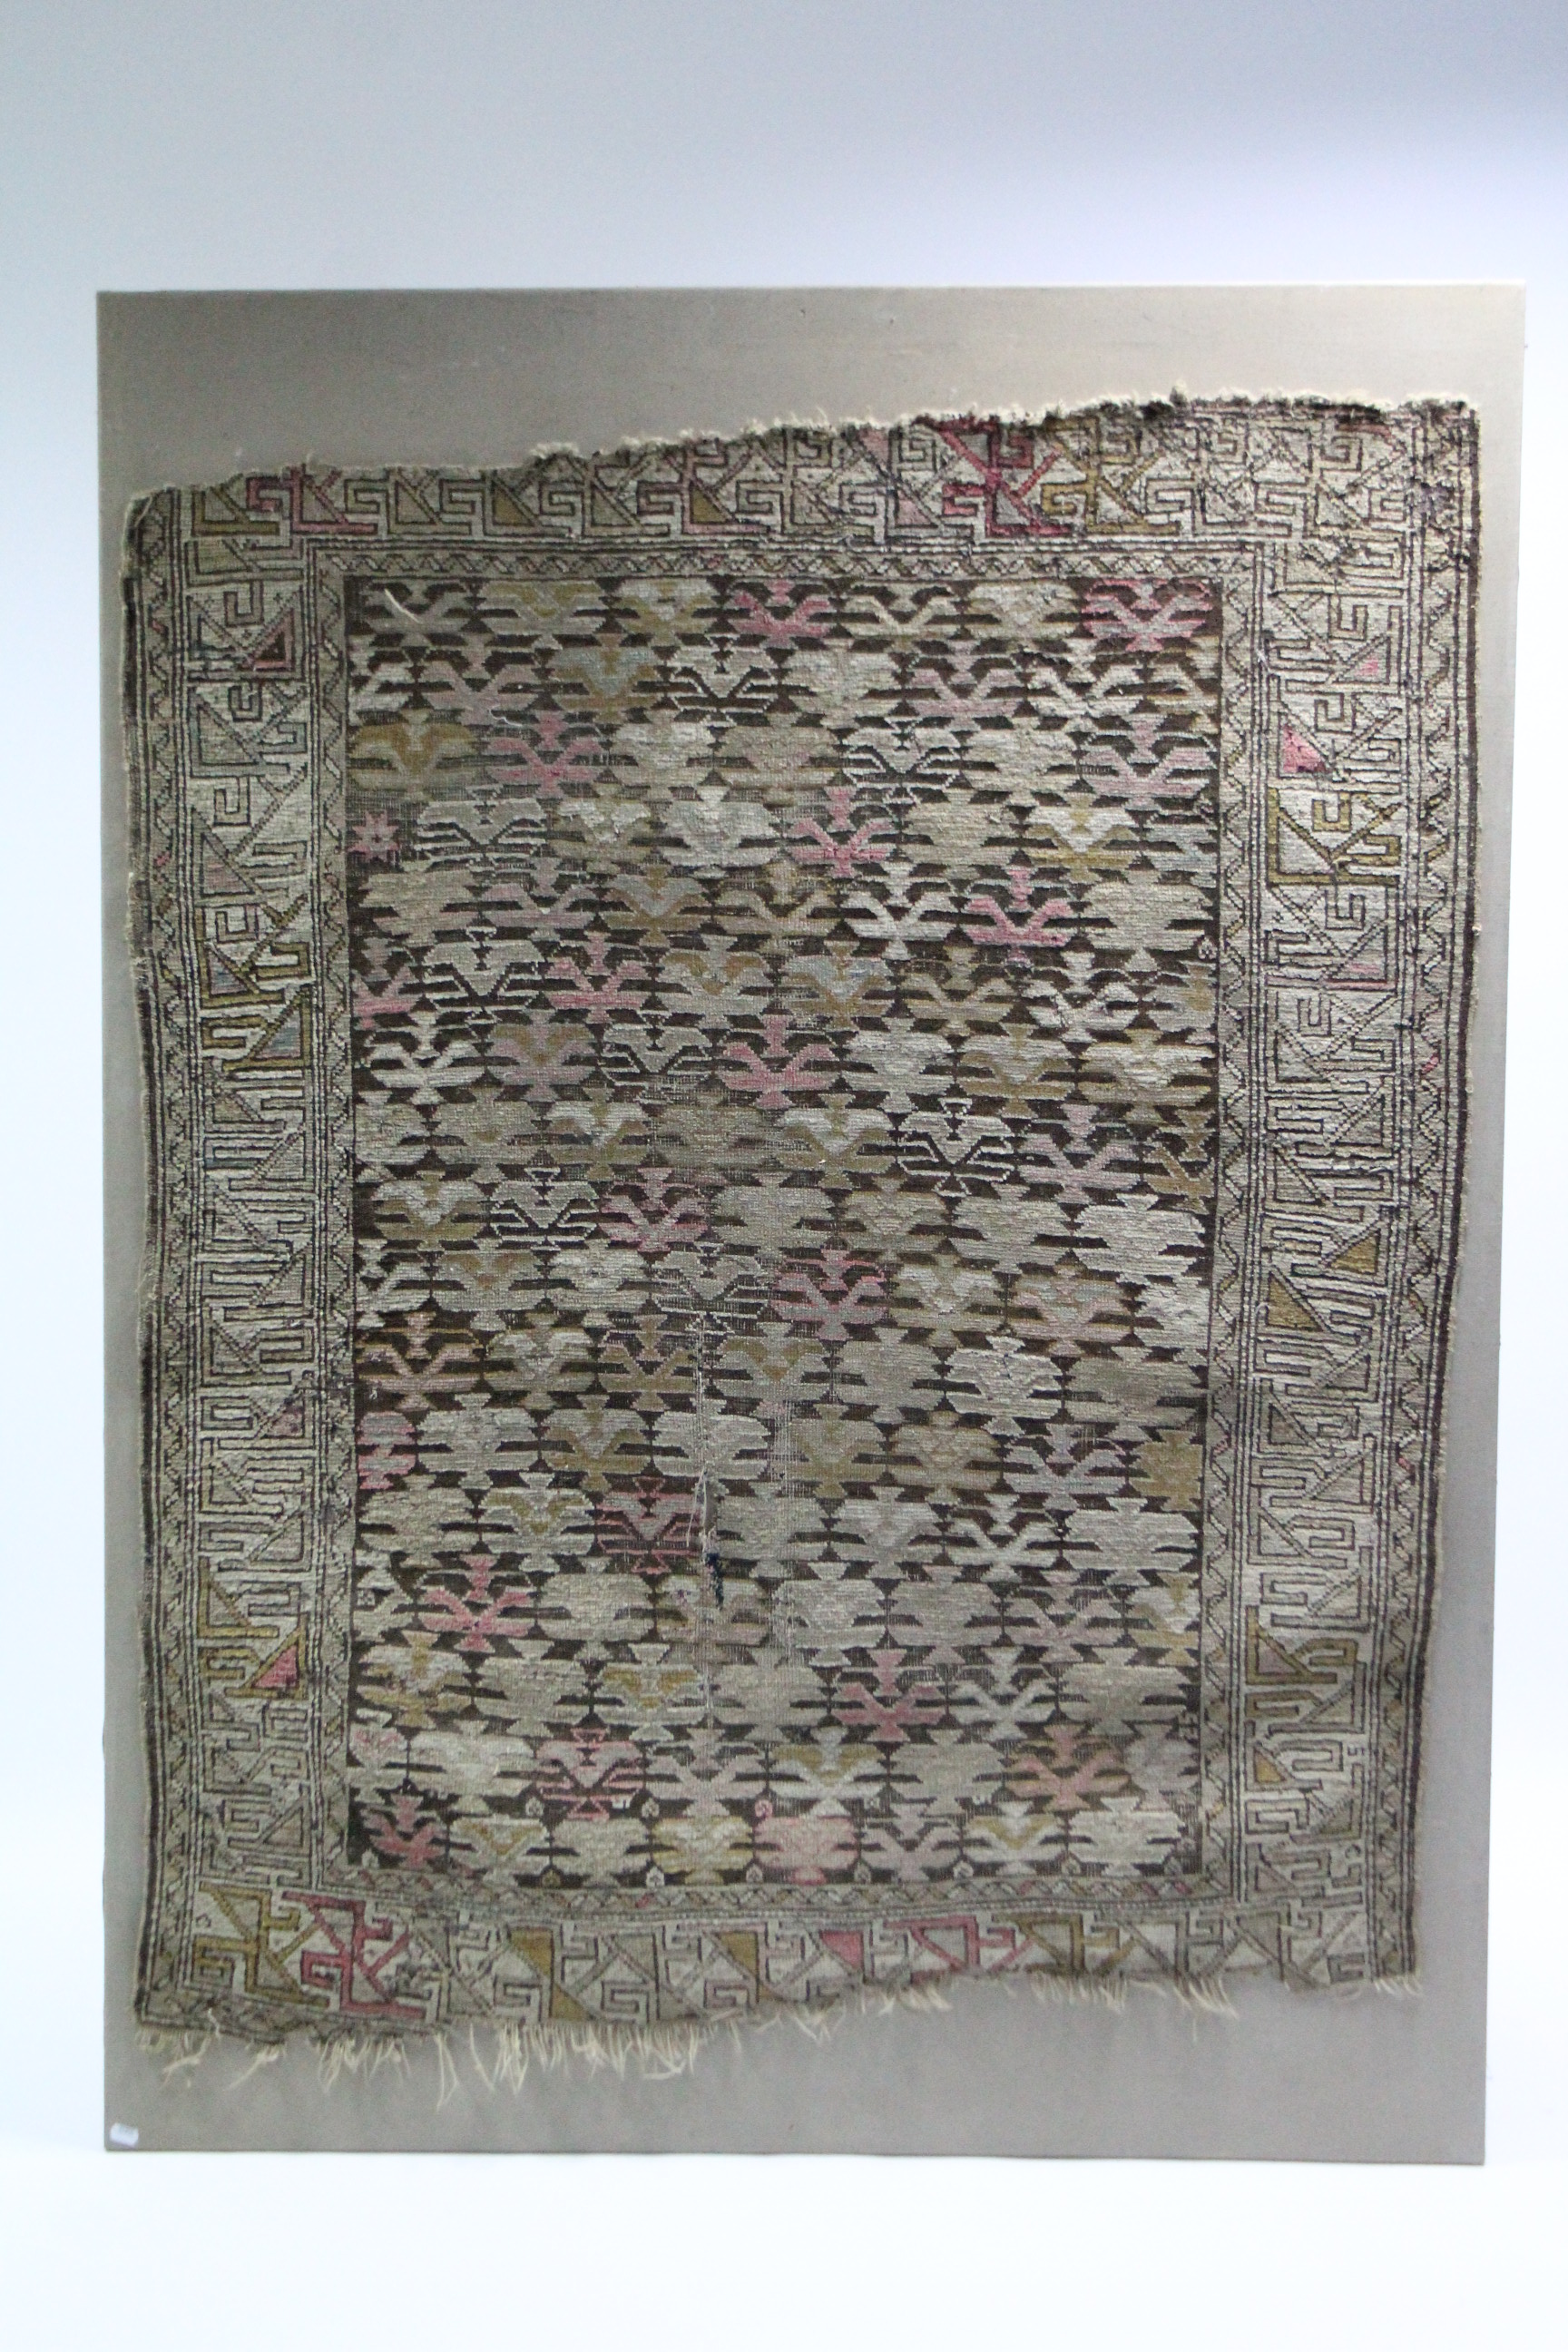 An antique Kelim rug of fawn ground, 4’ 6” x 3’ 10” (worn), applied to a 5’4½” x 4’ canvas.